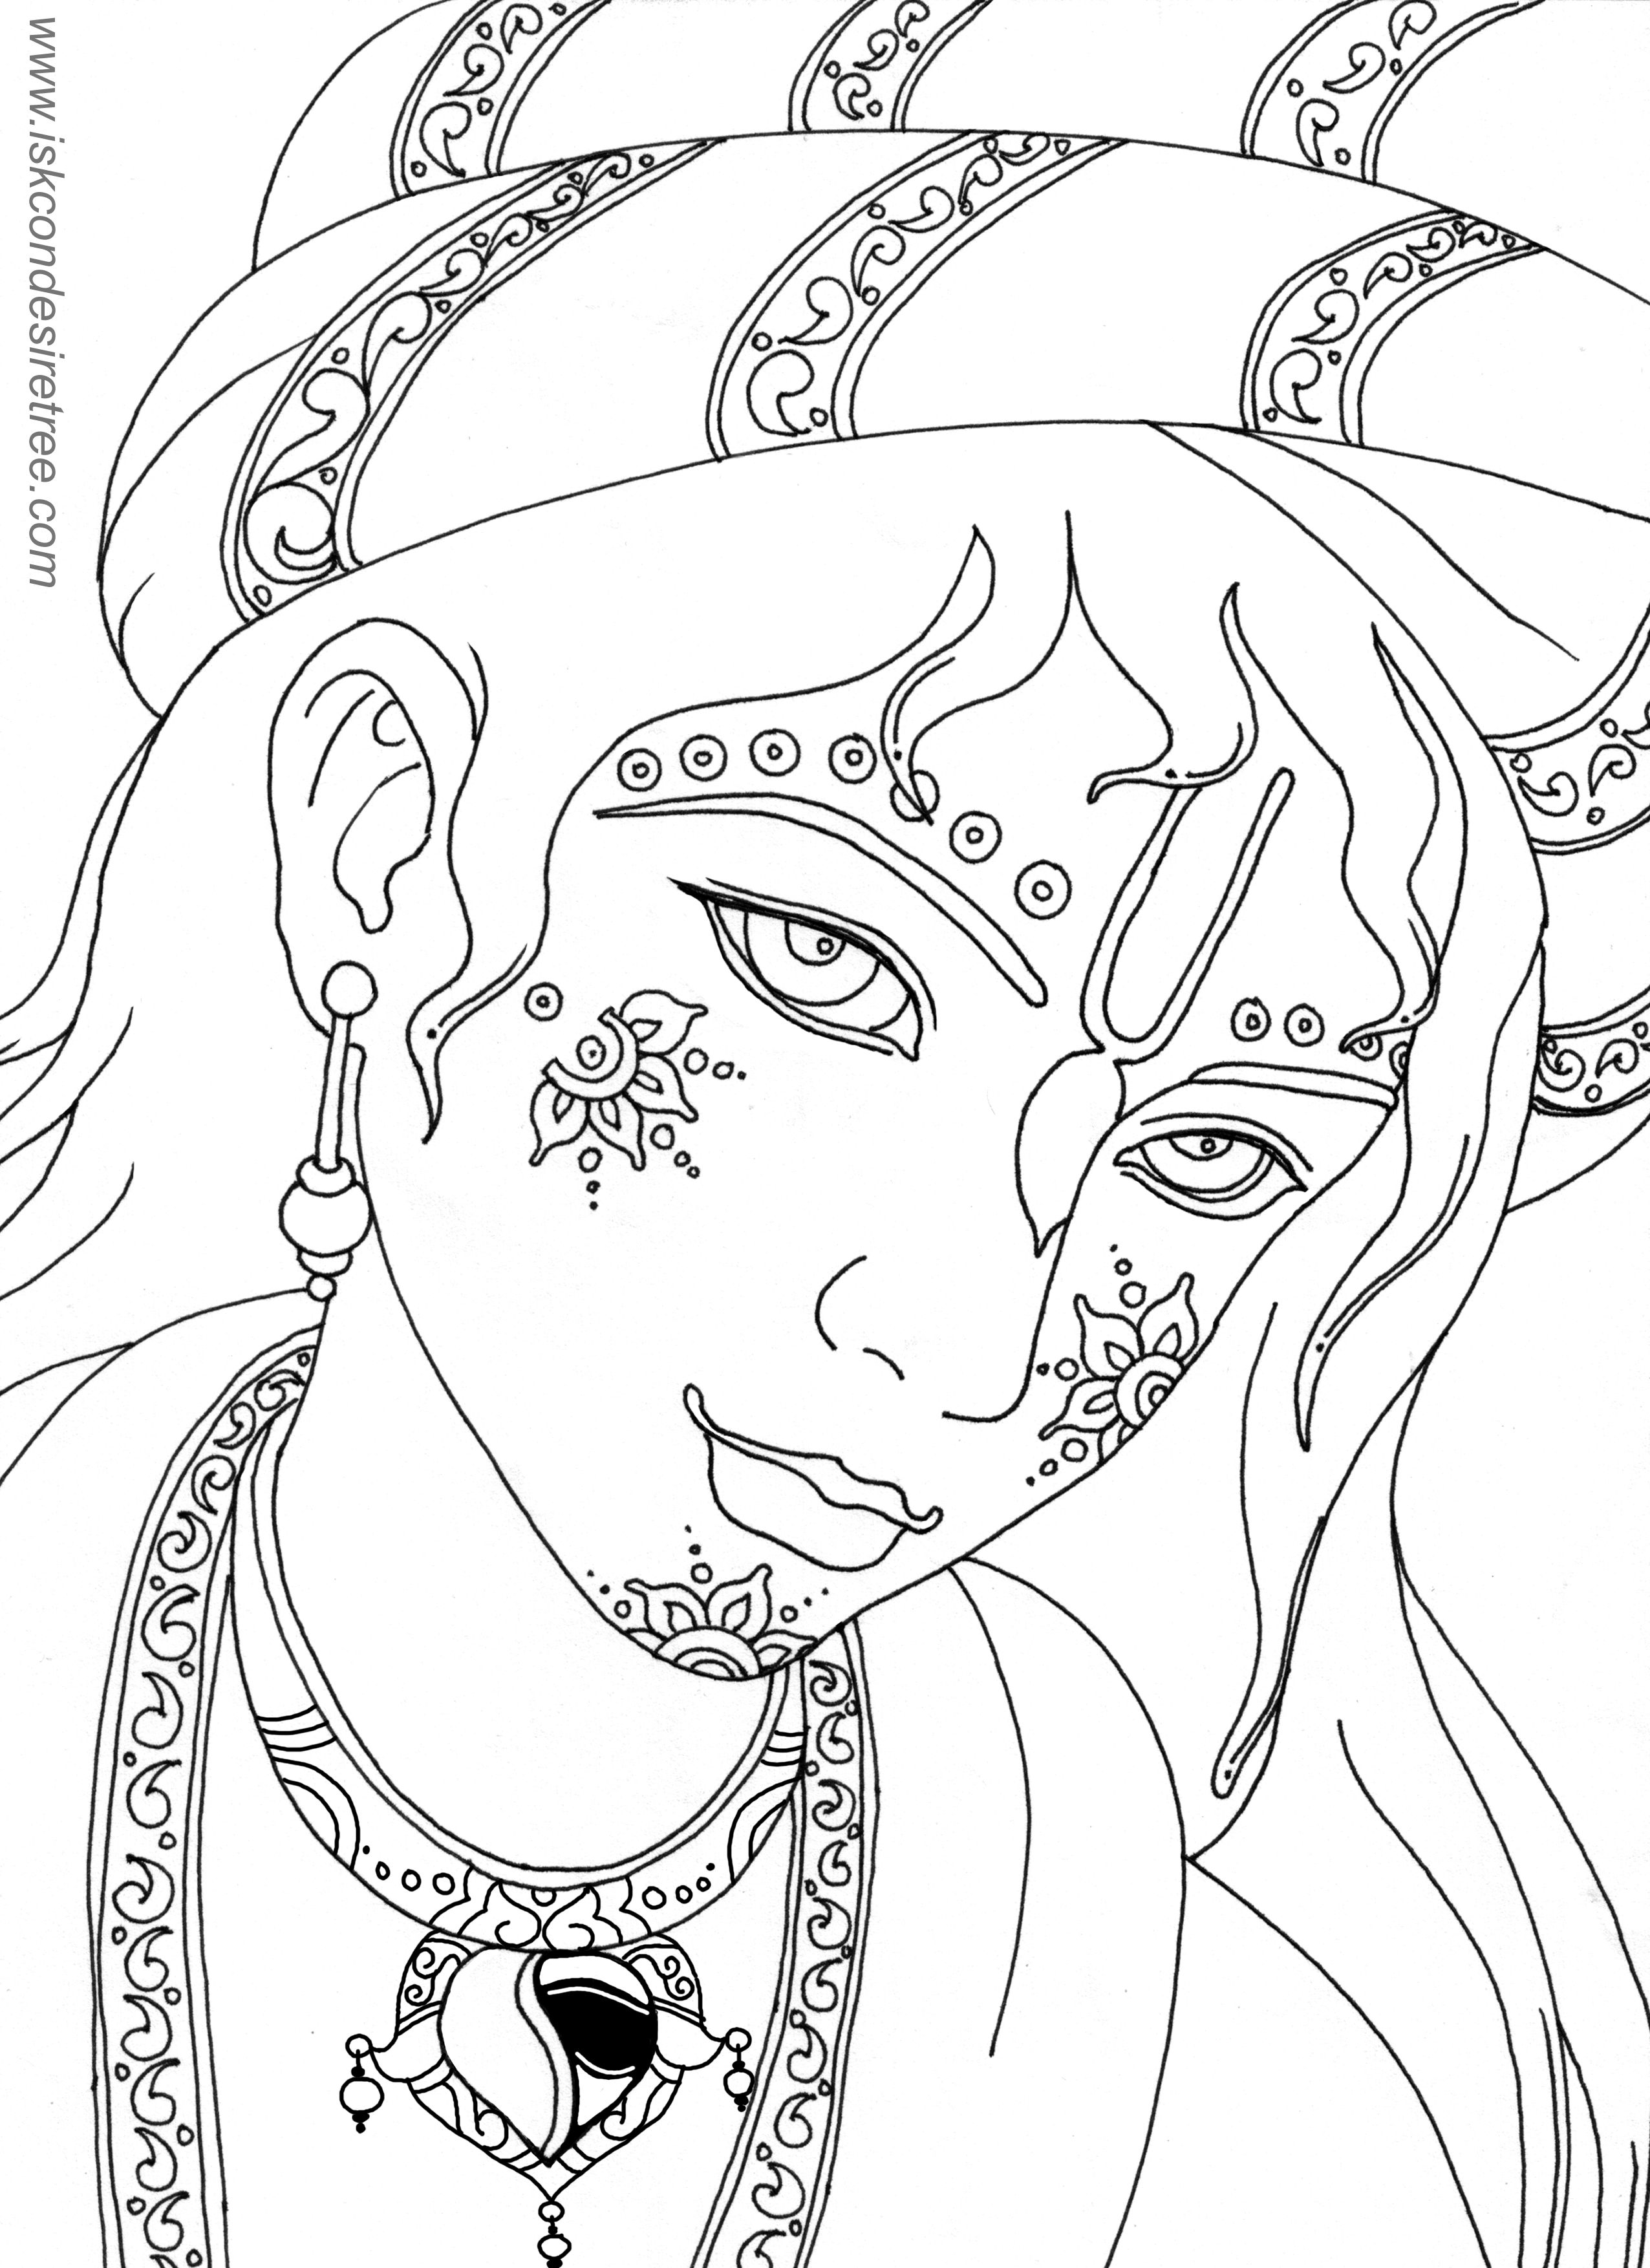 Krishna Coloring Pages - Coloring Pages 2019